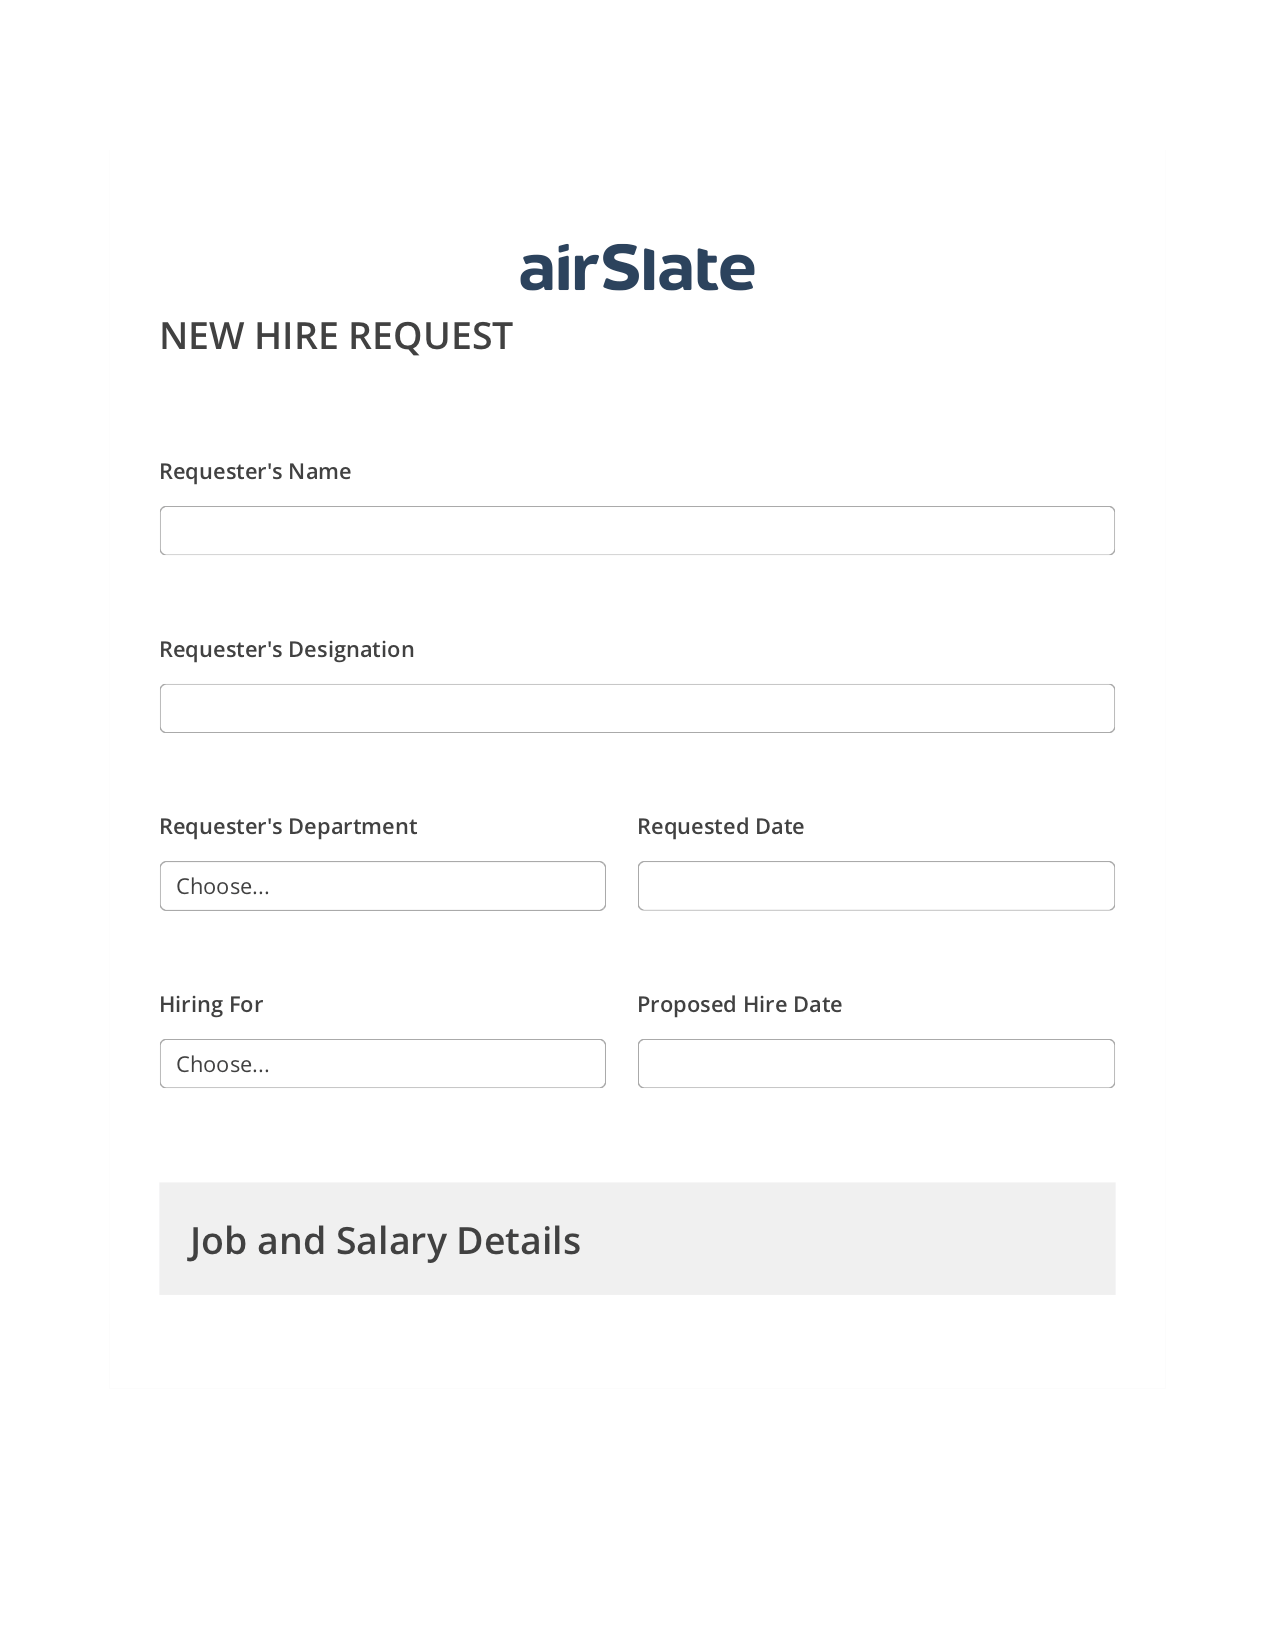 Multirole Hiring Request Workflow Pre-fill Dropdowns from Google Sheet Bot, Send Mailchimp Campaign Bot, Archive to Box Bot